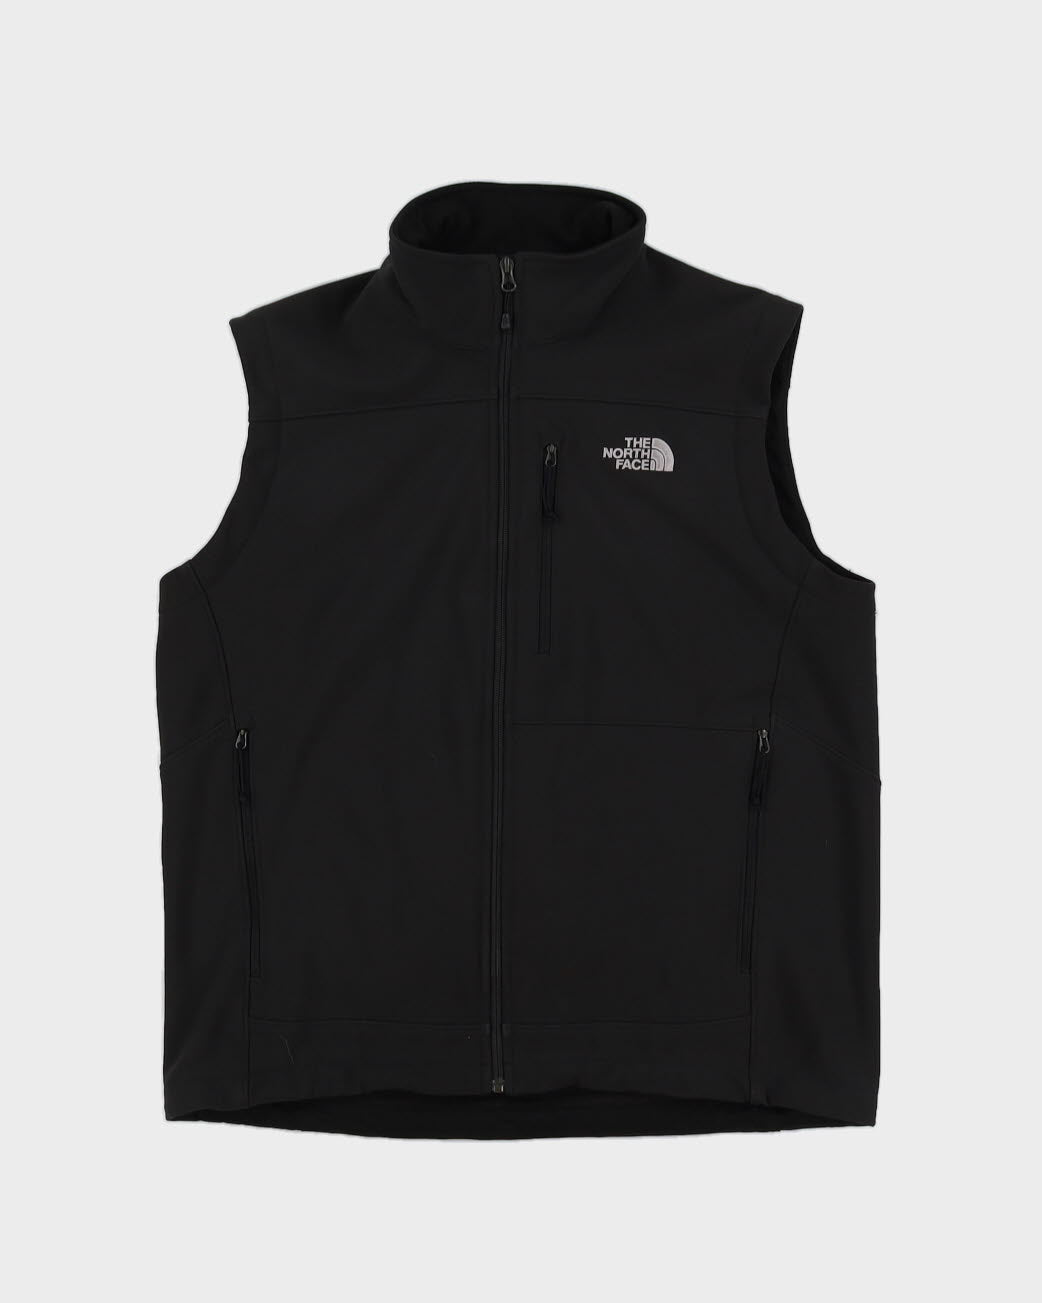 The North Face Black Fleece Lined Gilet  - L